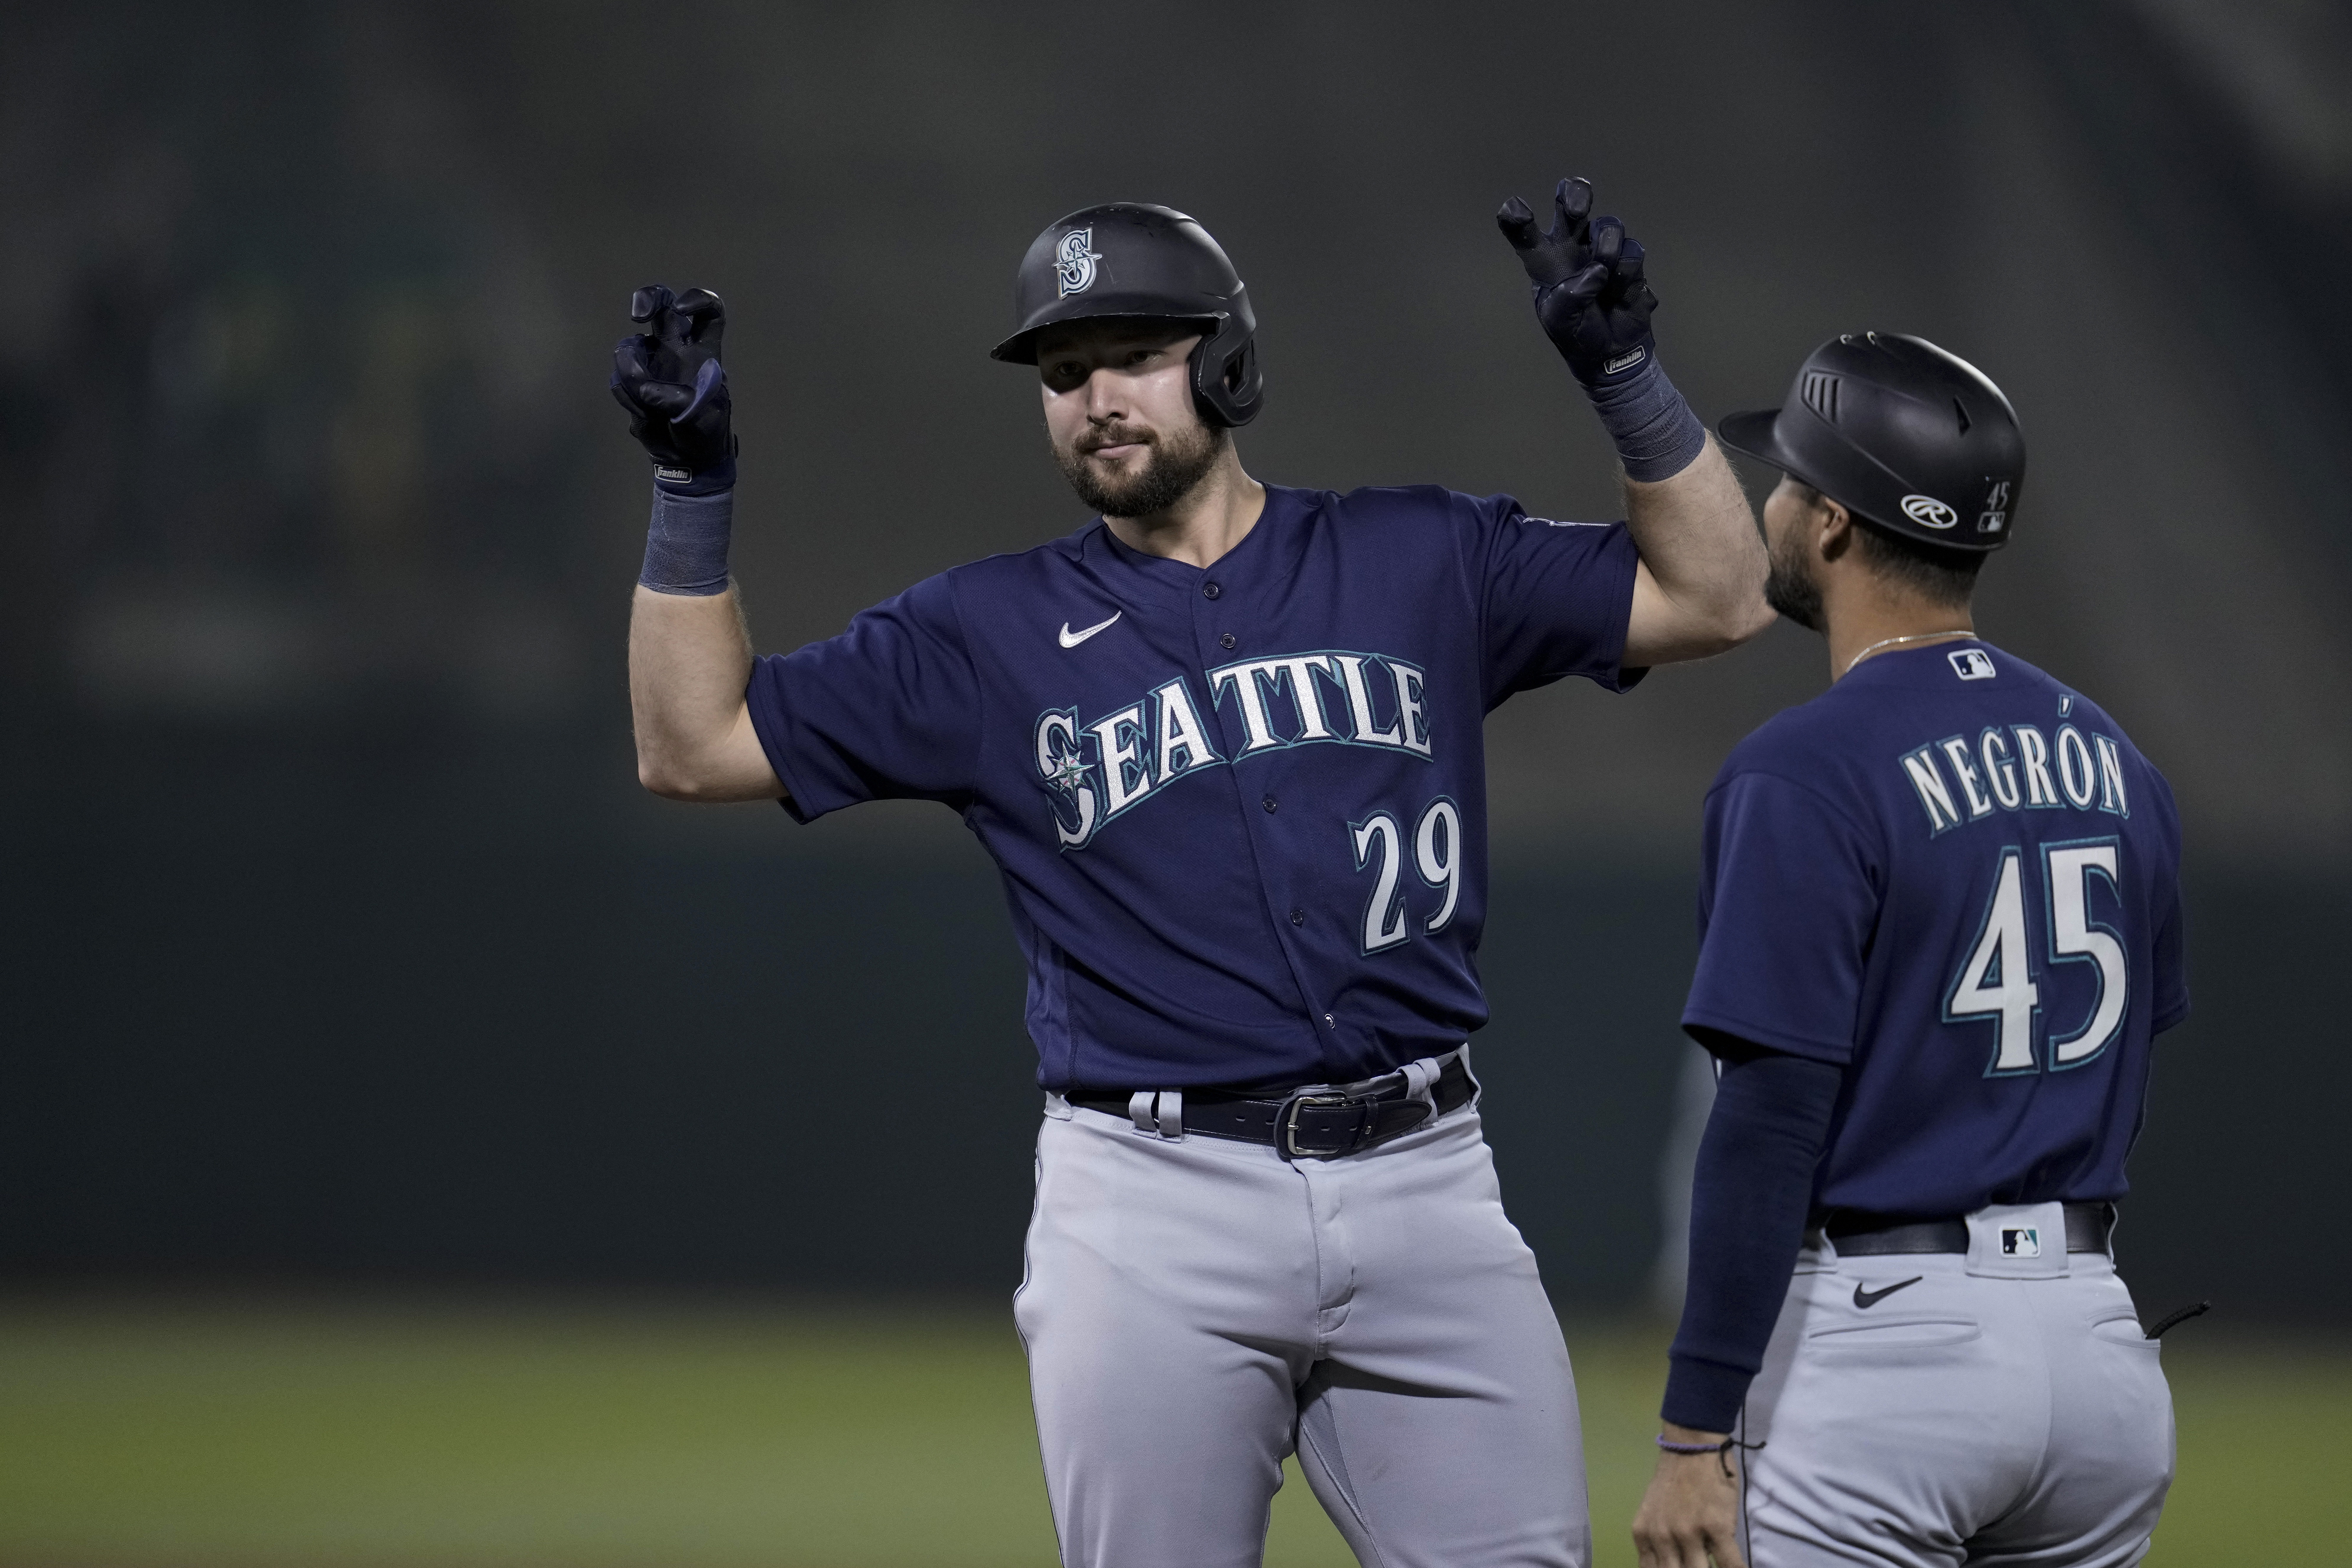 JJ Bleday homers in Athletics' loss to Mariners